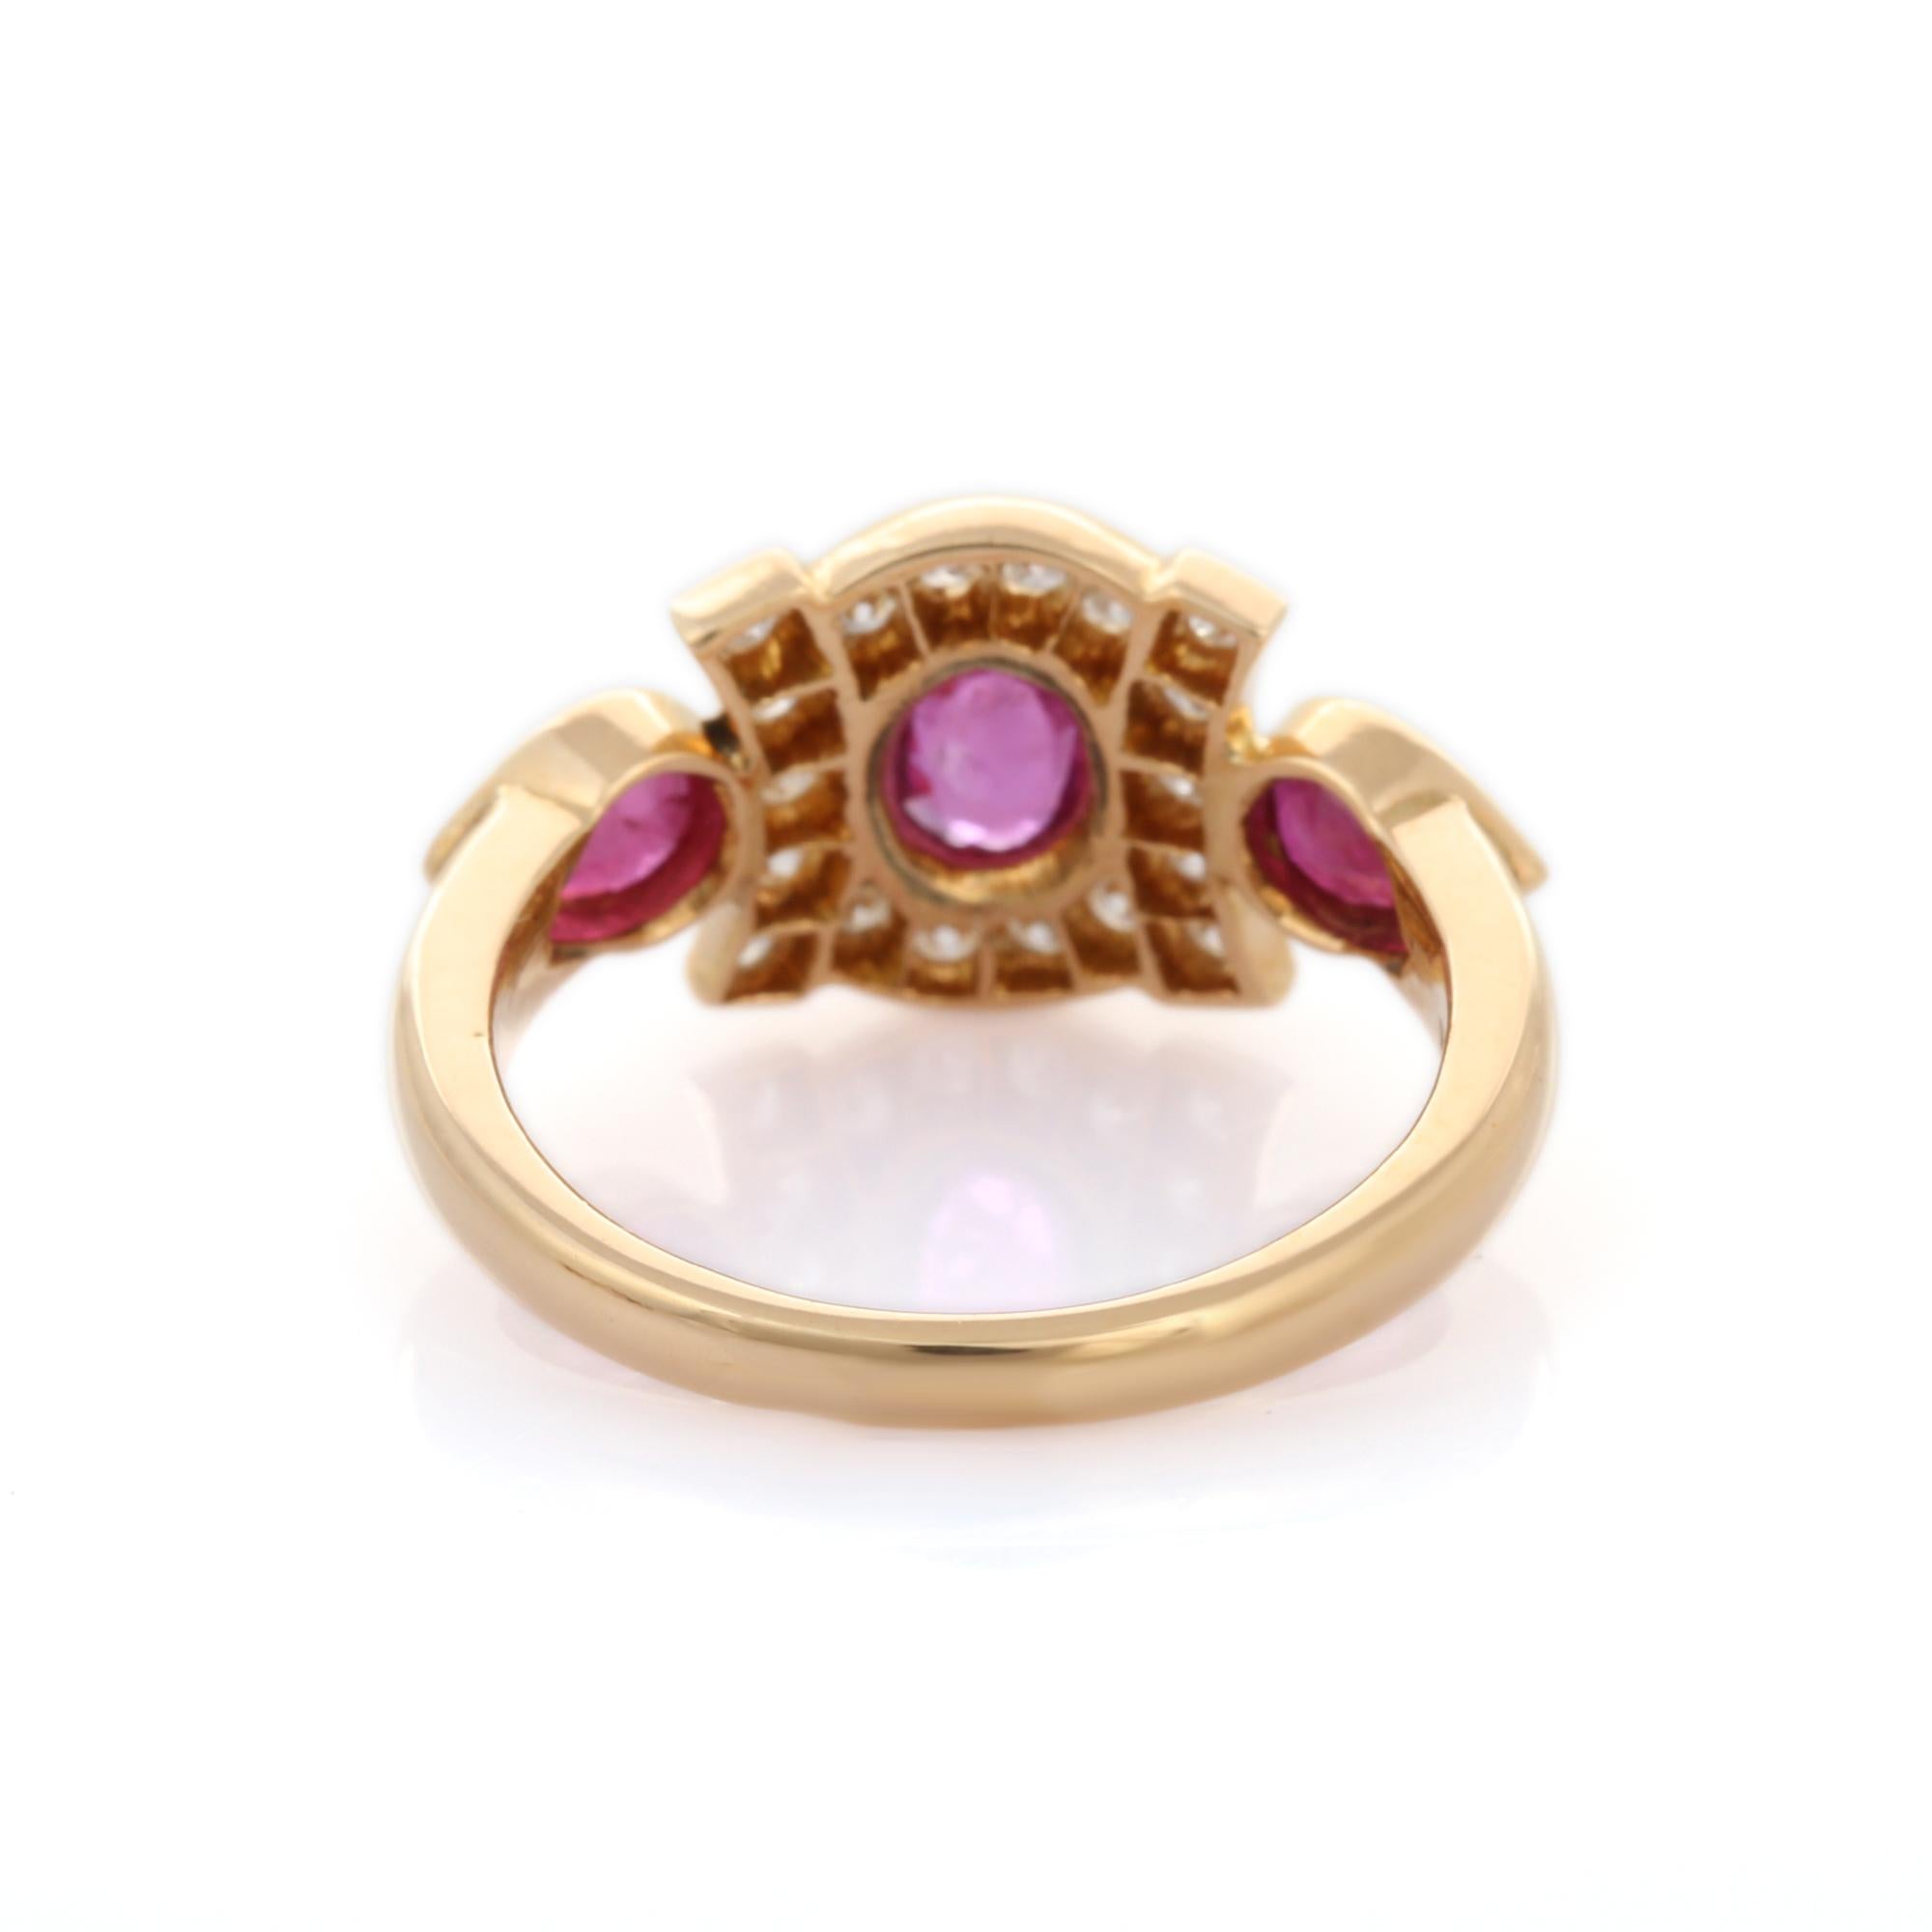 For Sale:  18K Yellow Gold Ruby Three Stone Ring with Diamonds Wedding Gemstone Ring 5